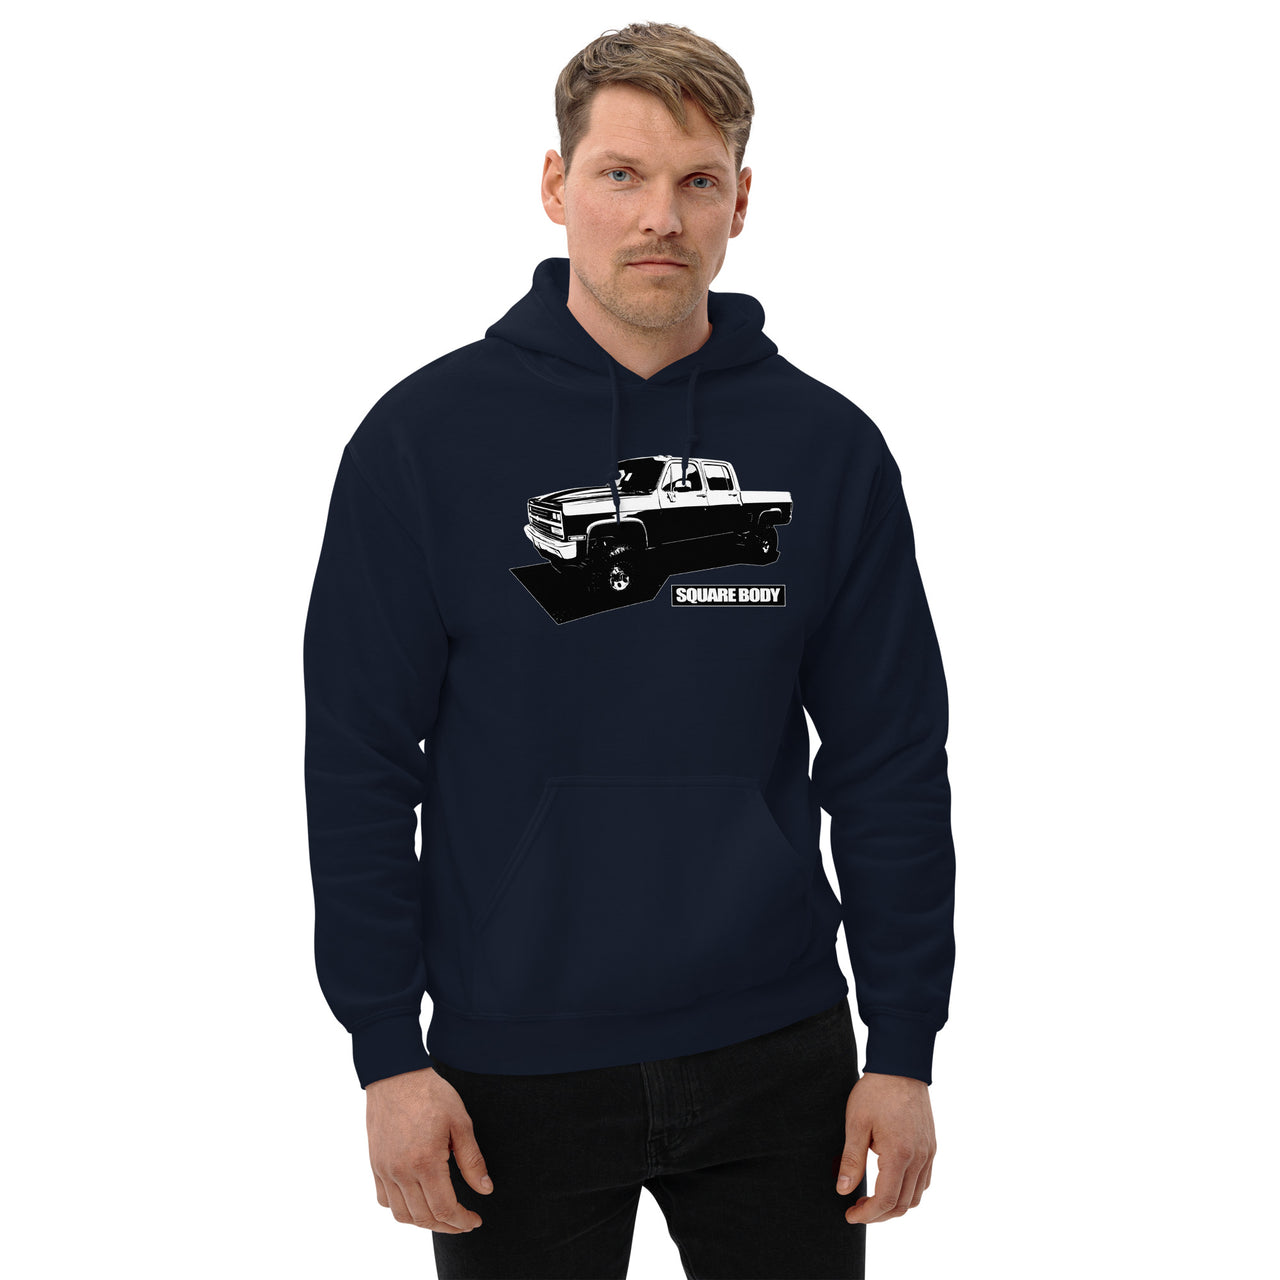 Squarebody Crew Cab Truck Hoodie modeled in navy